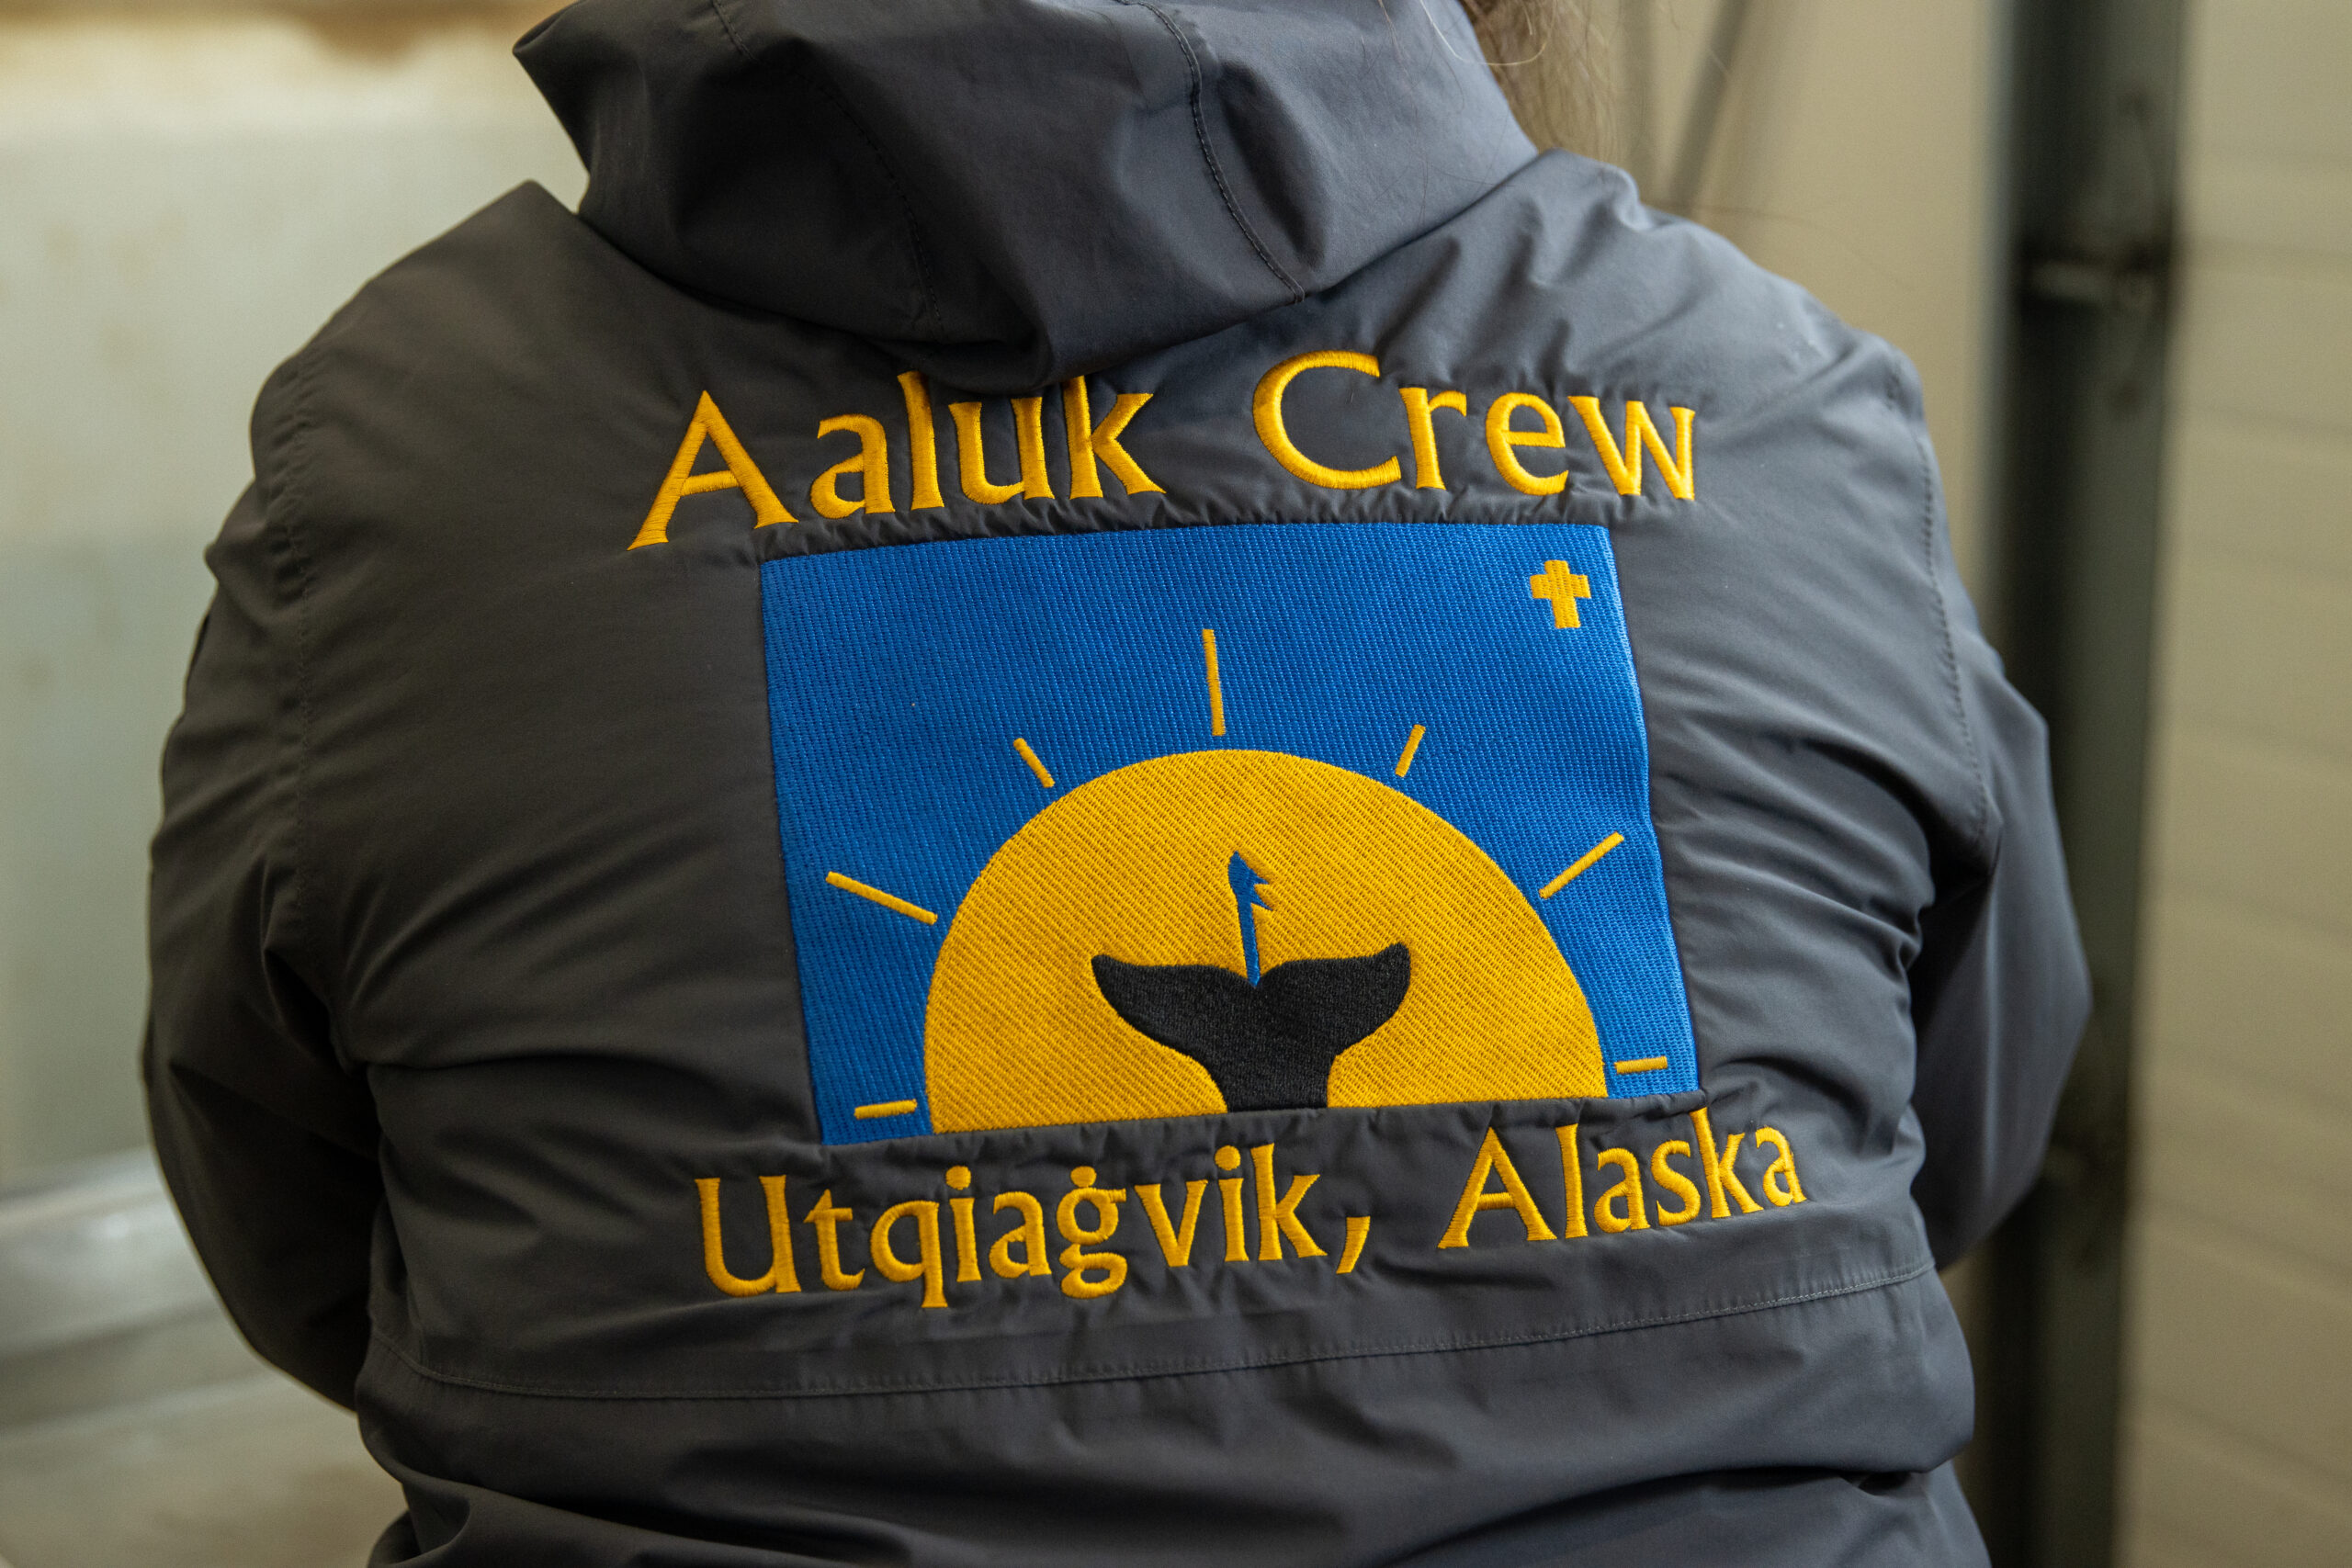 A yellow and blue logo on the back of a hoodie reads "Aaluk Crew Utqiagvik, Alaska"